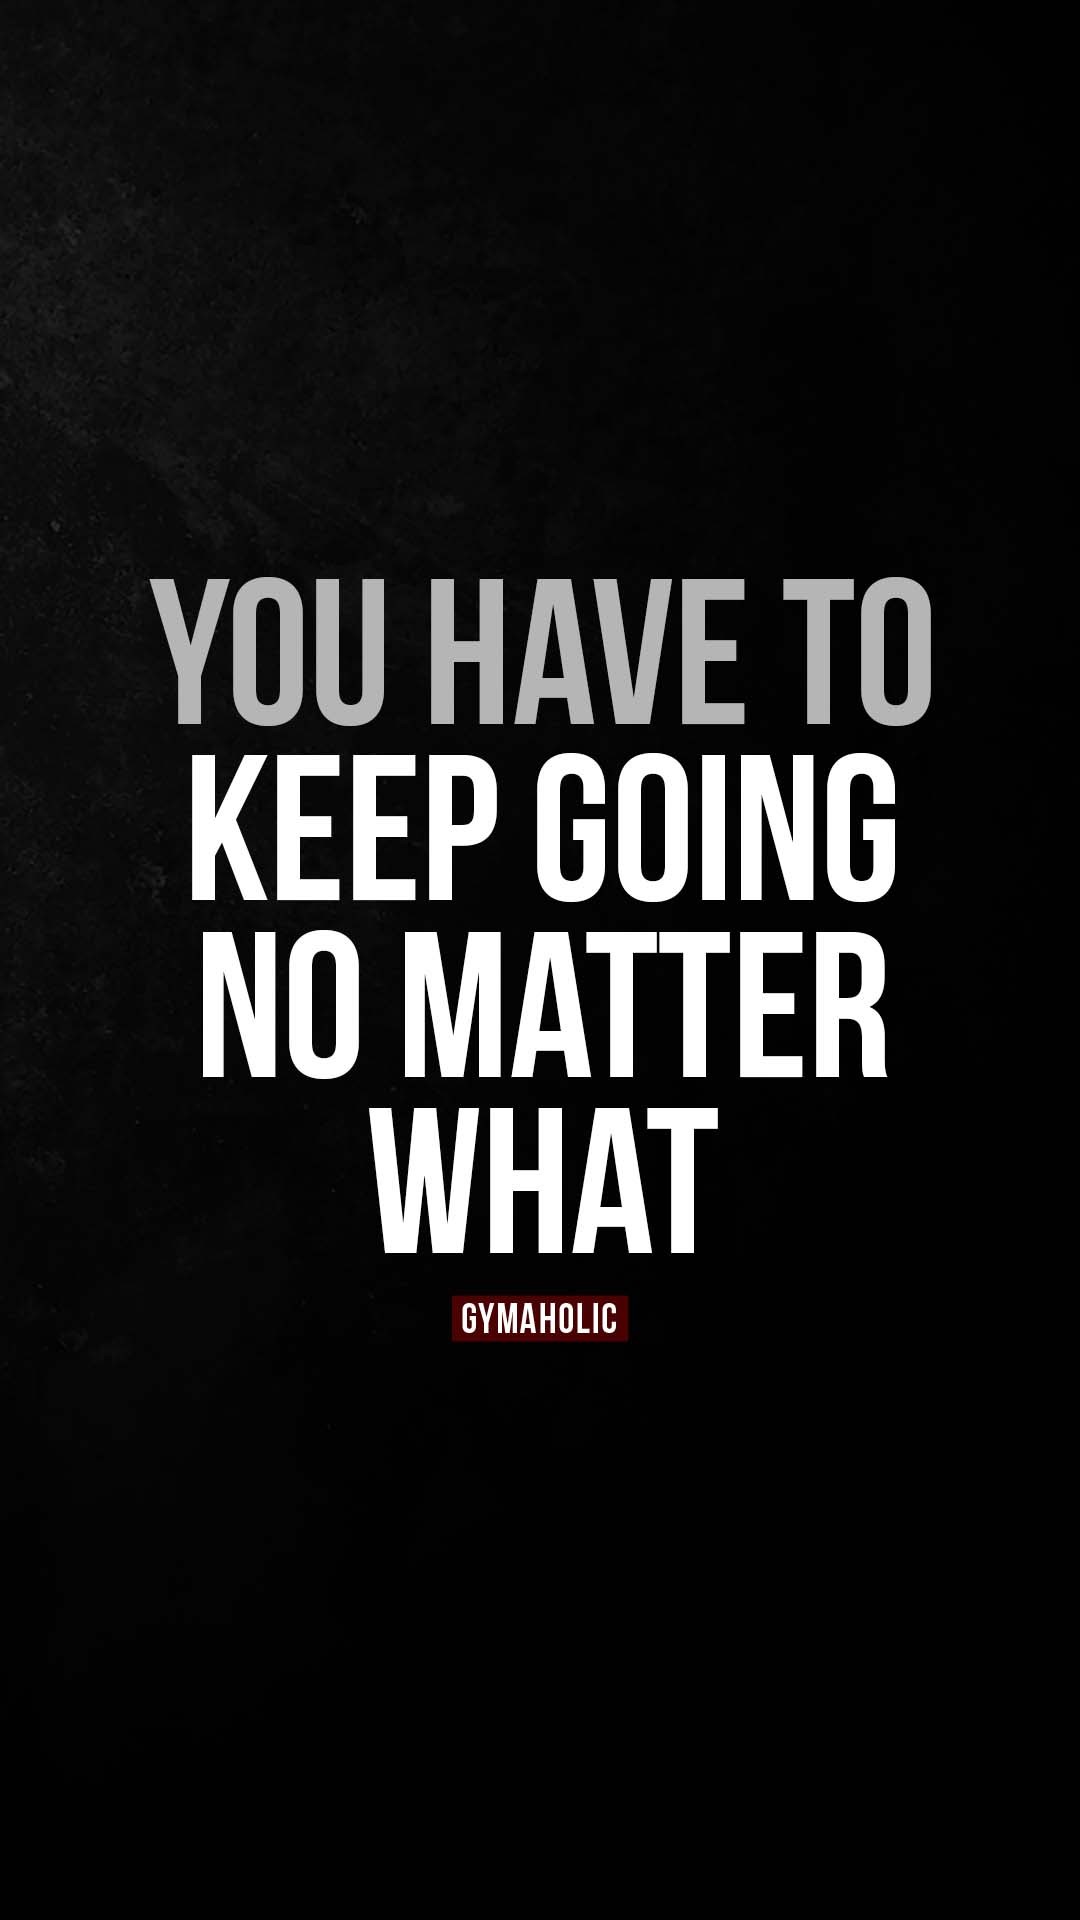 You have to keep going no matter what